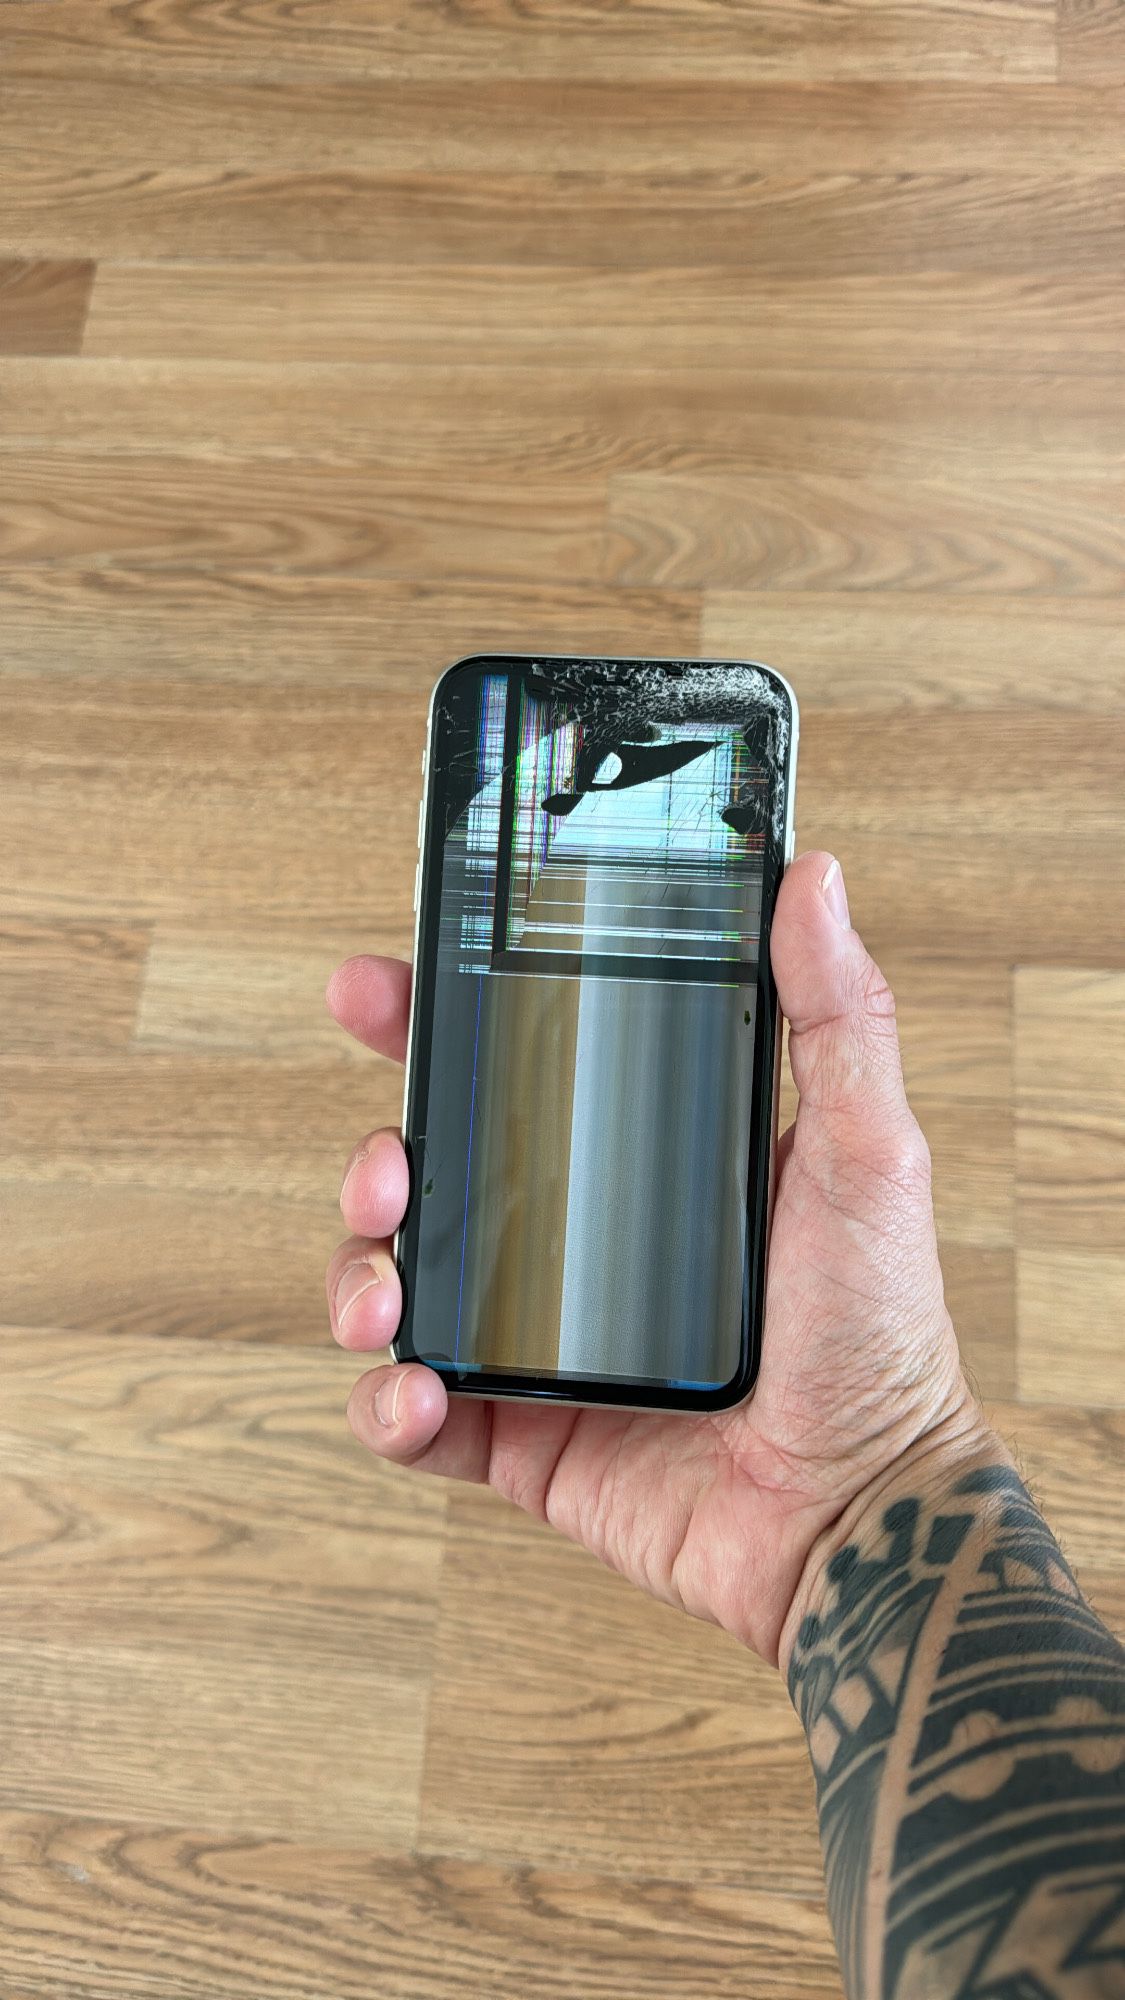 iPhone 11 Lcd Screen Replacement $55